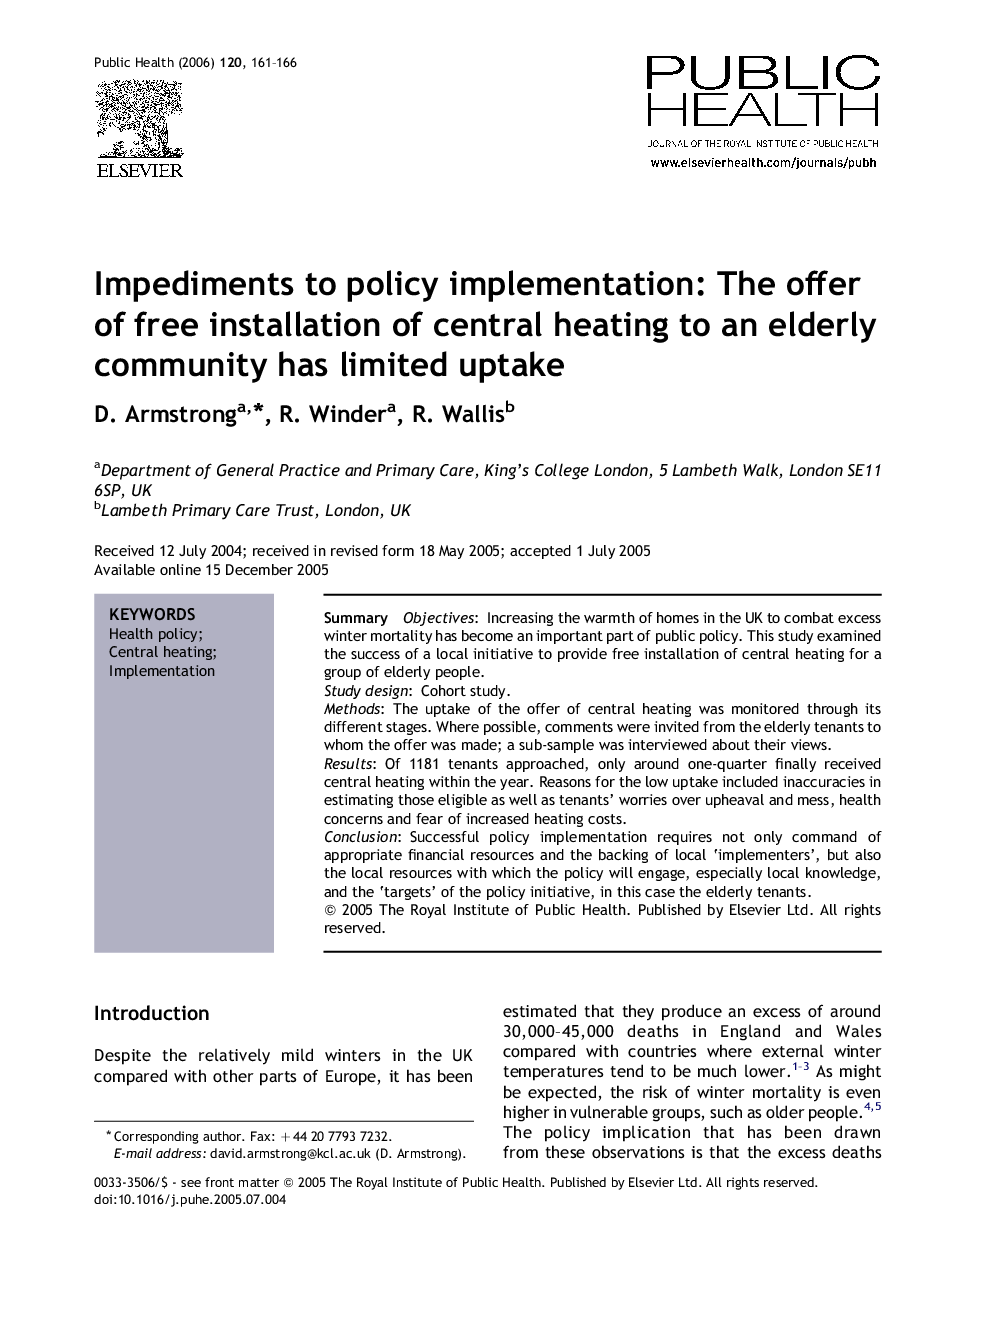 Impediments to policy implementation: The offer of free installation of central heating to an elderly community has limited uptake